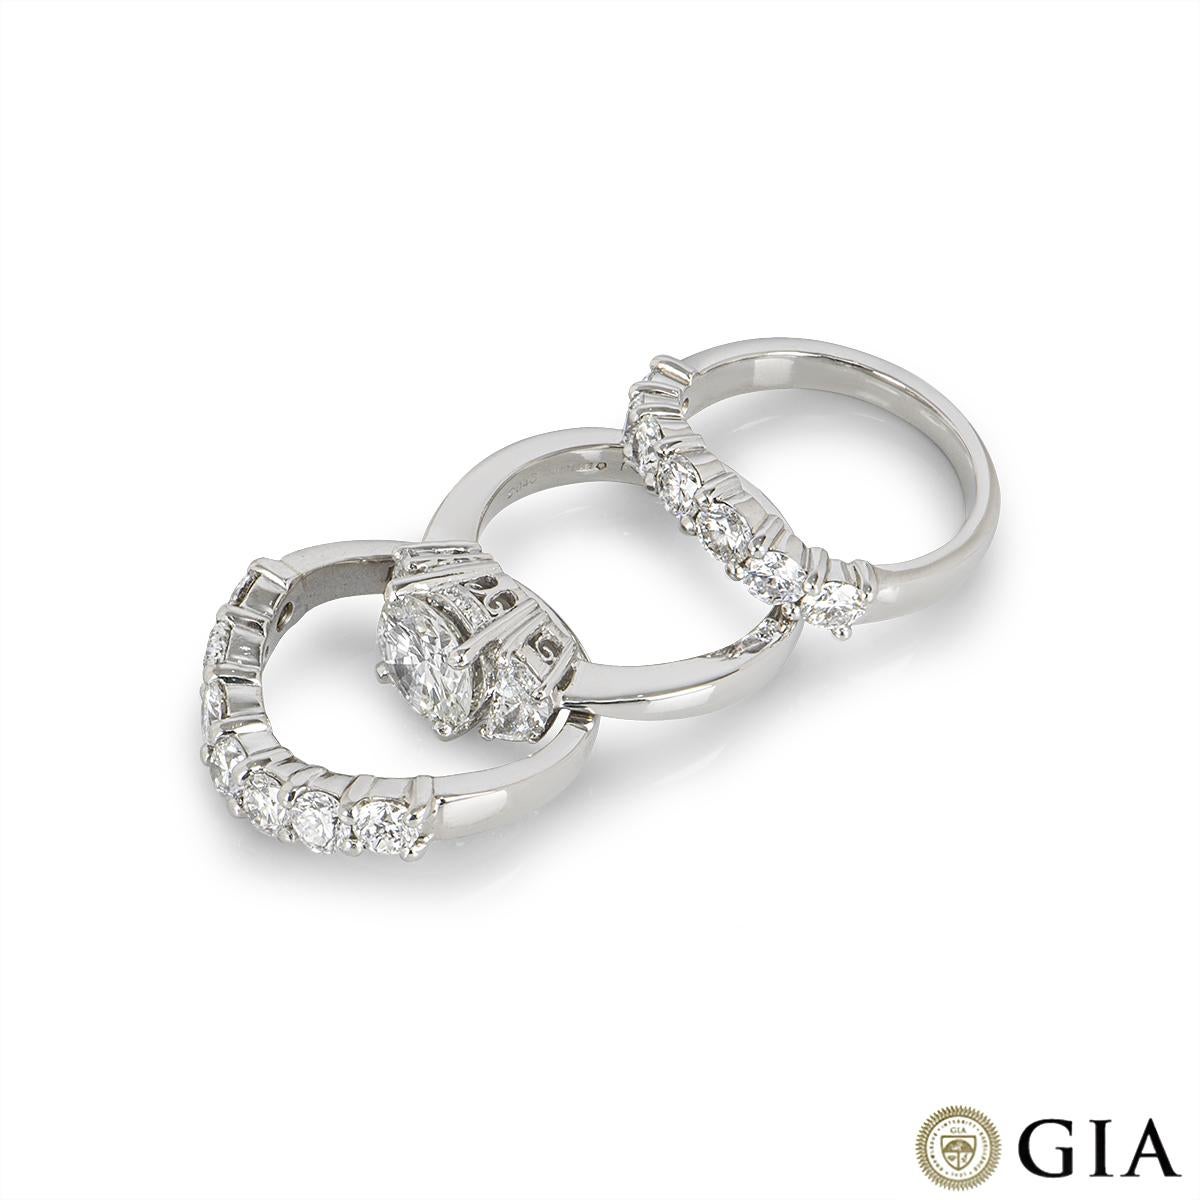 GIA Certified Platinum Diamond Engagement Ring and Bridal Set 1.55ct I/VS2 In Excellent Condition For Sale In London, GB